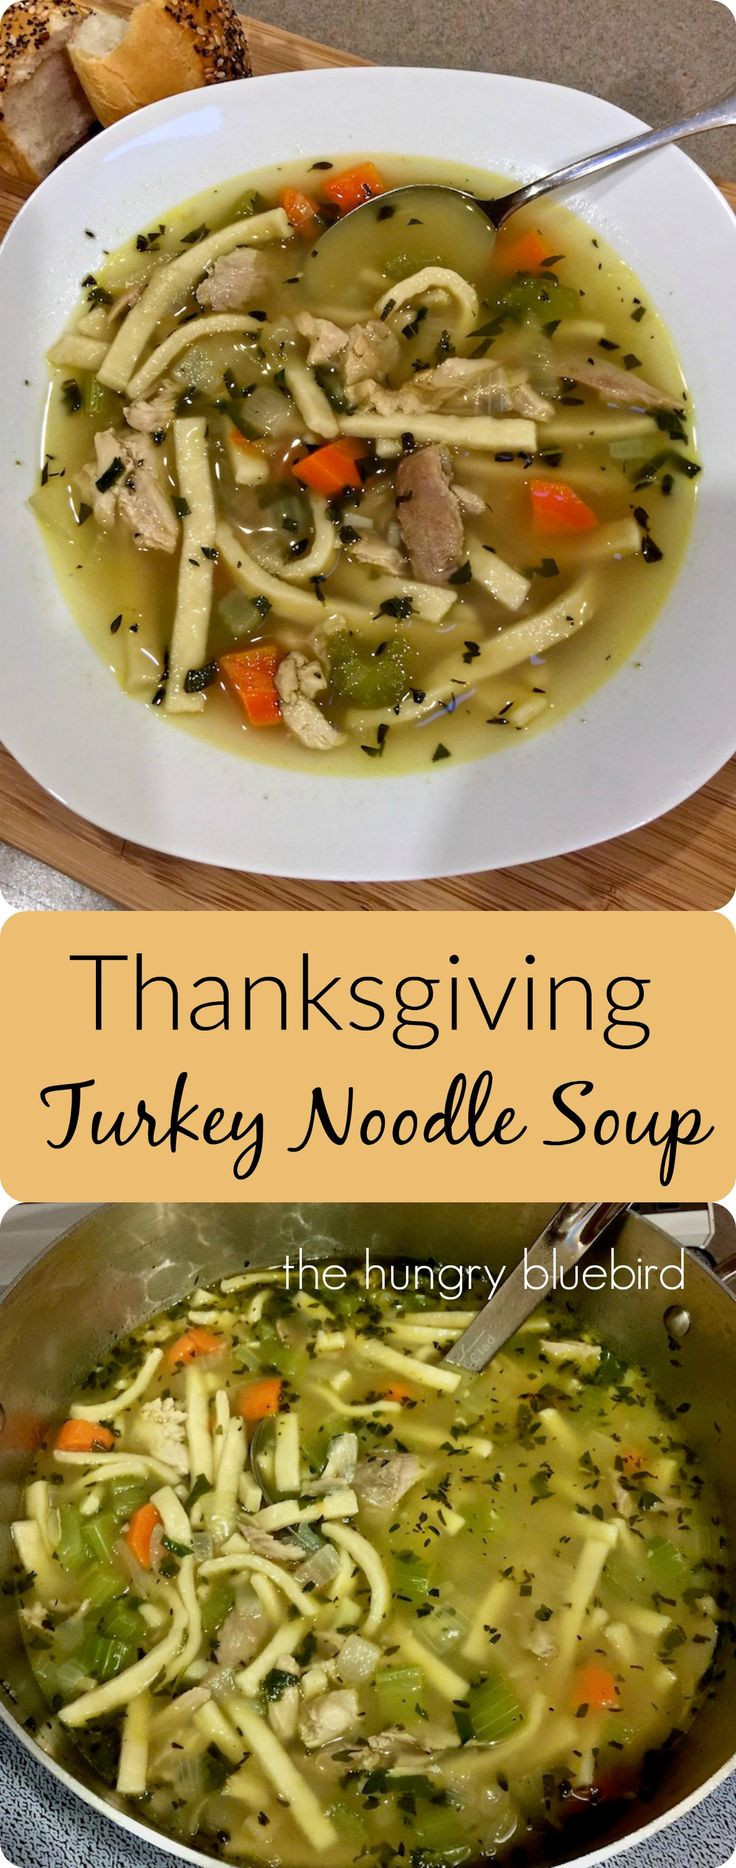 Turkey Soup From Thanksgiving Leftovers
 17 Best ideas about Turkey Soup on Pinterest